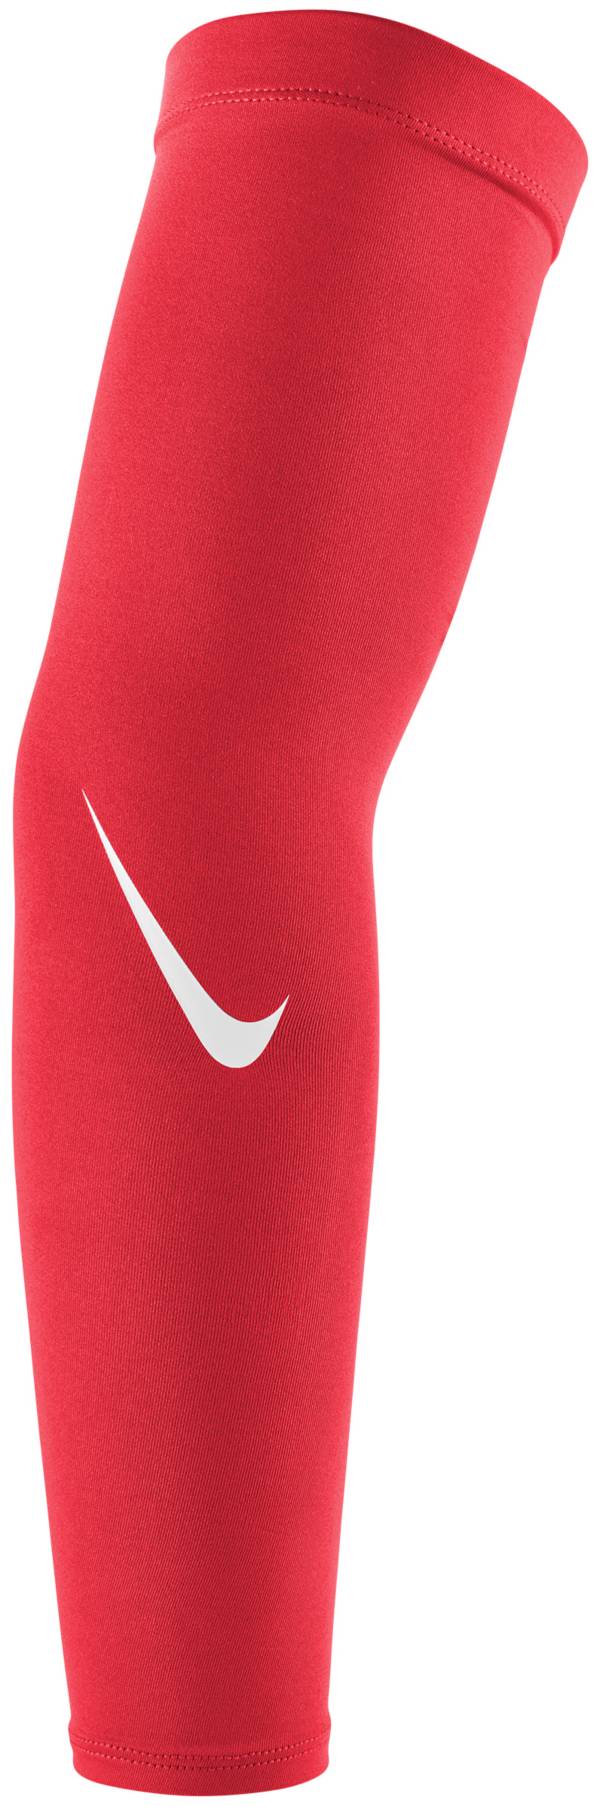 Nike Pro Adult Dri-FIT 4.0 Arm Sleeves product image